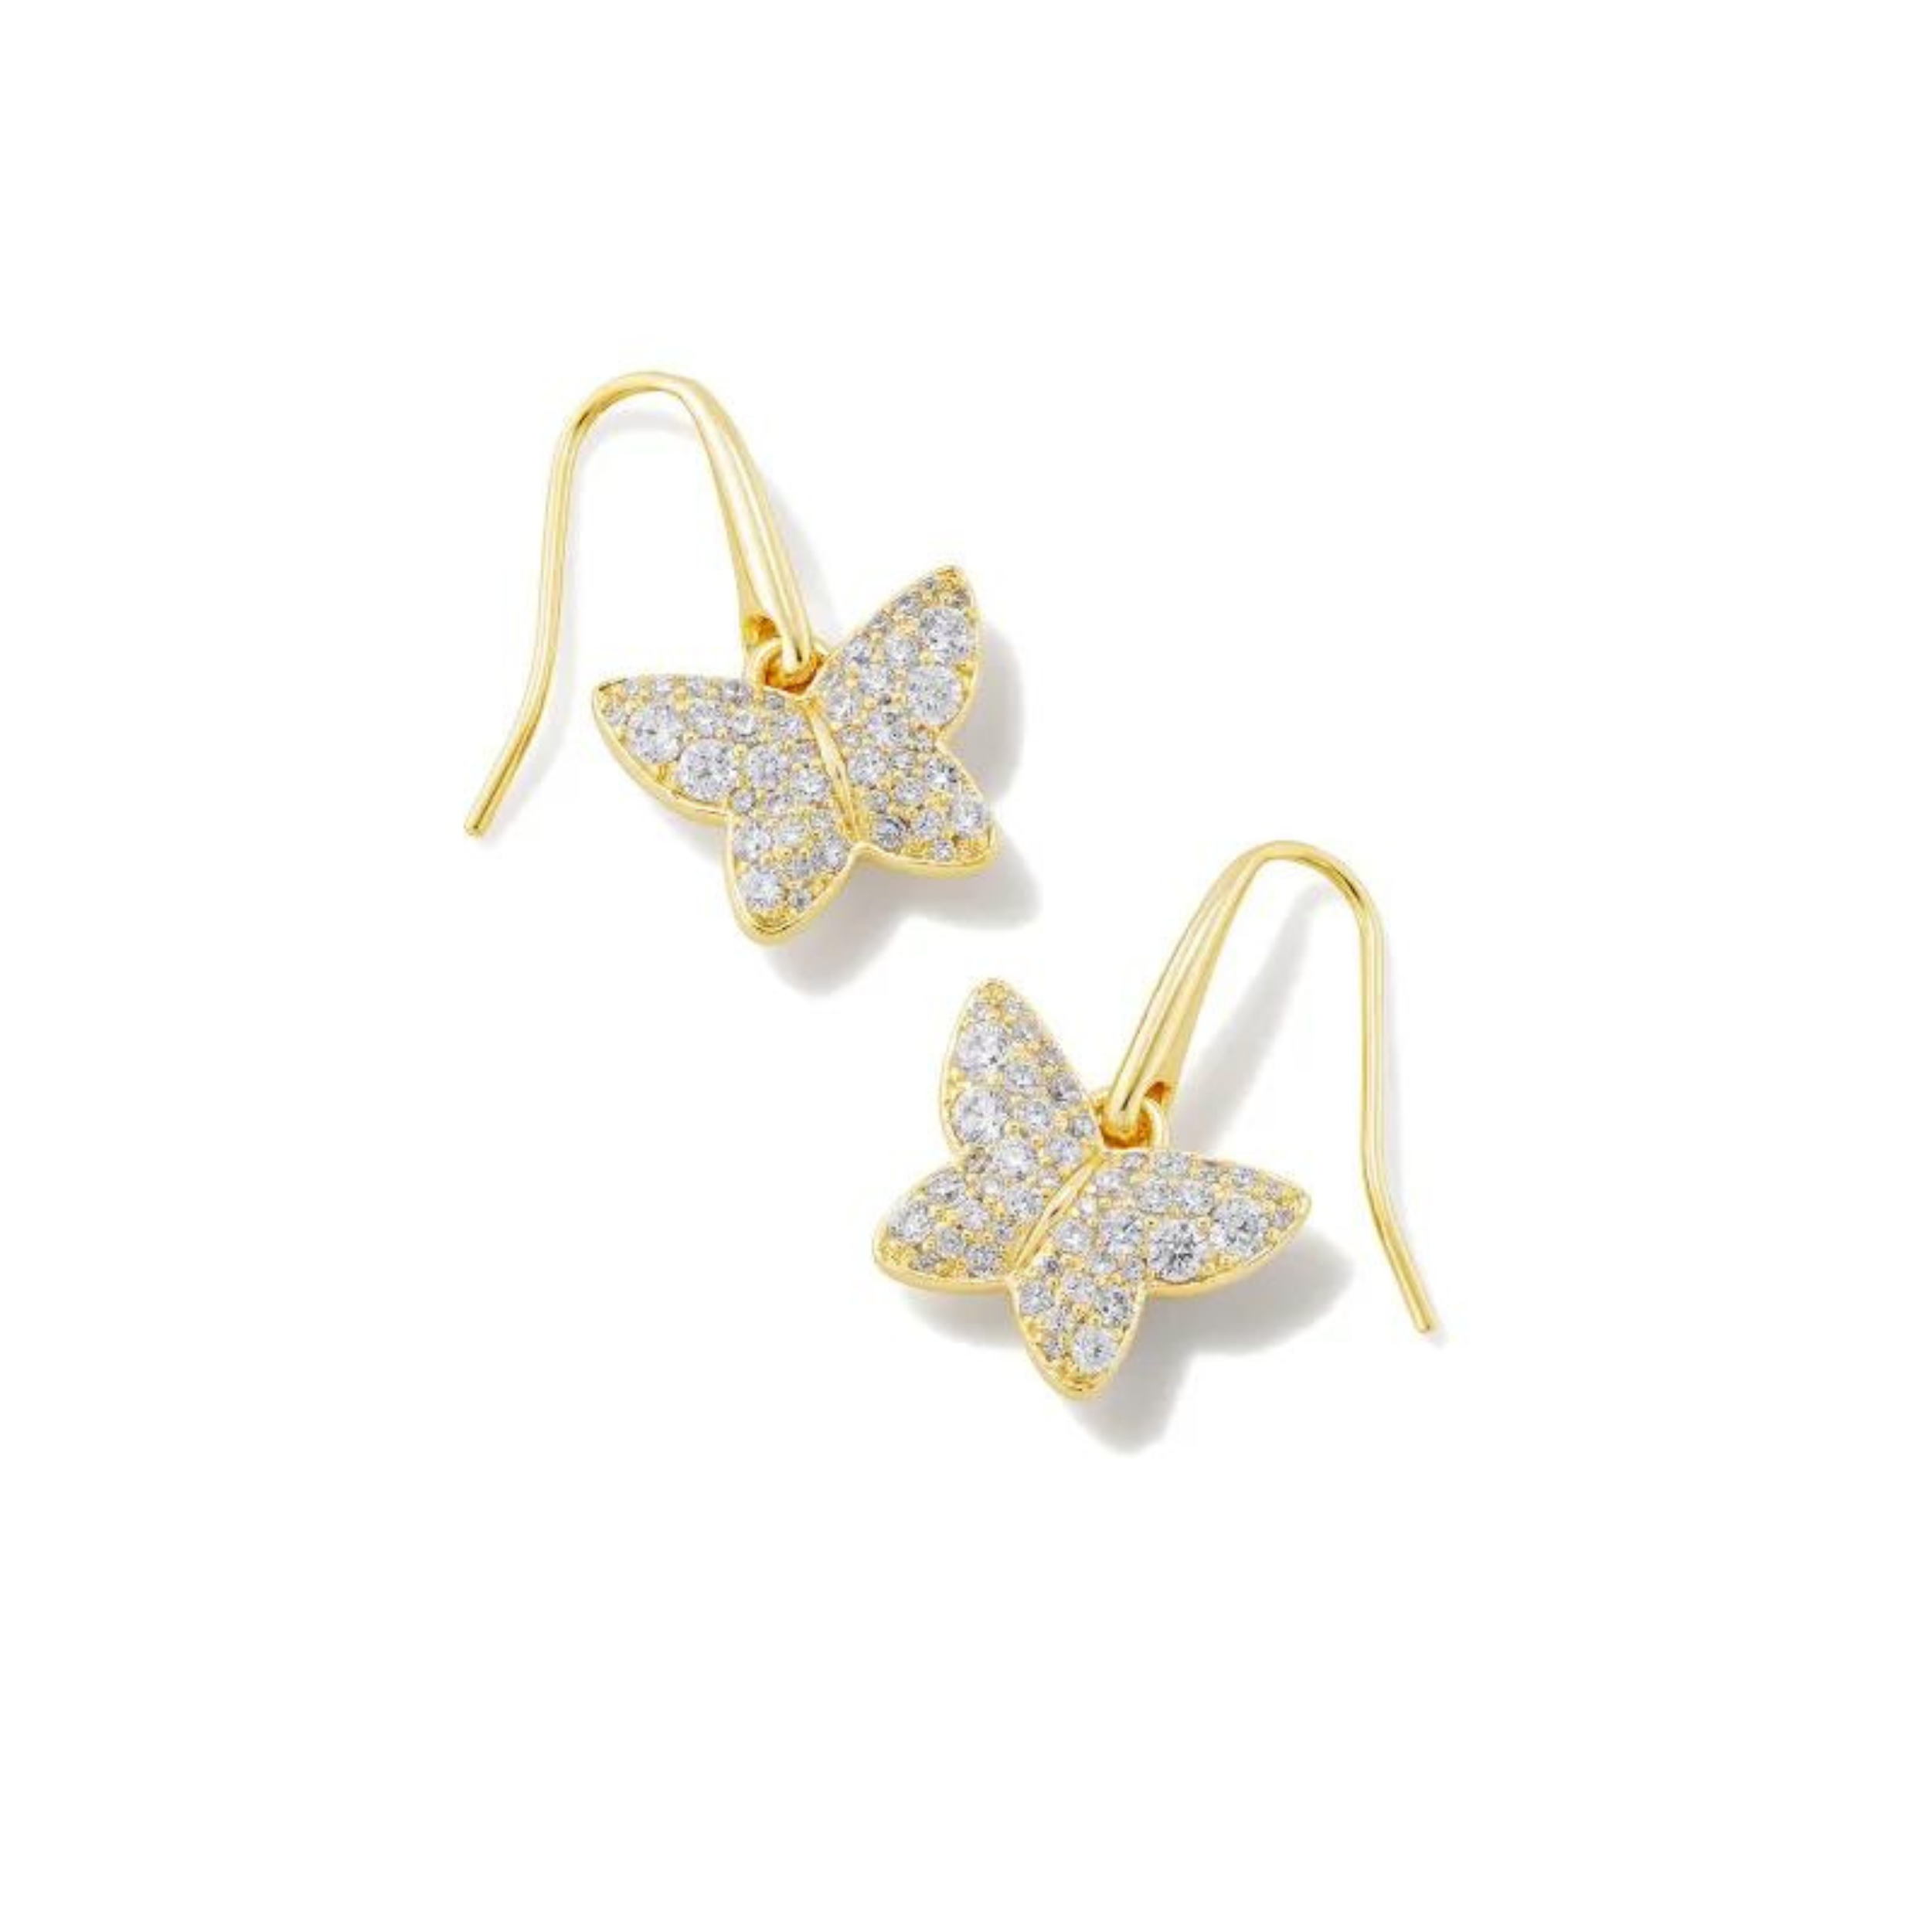 Gold dangle butterfly earrings with white crystals, pictured on a white background.